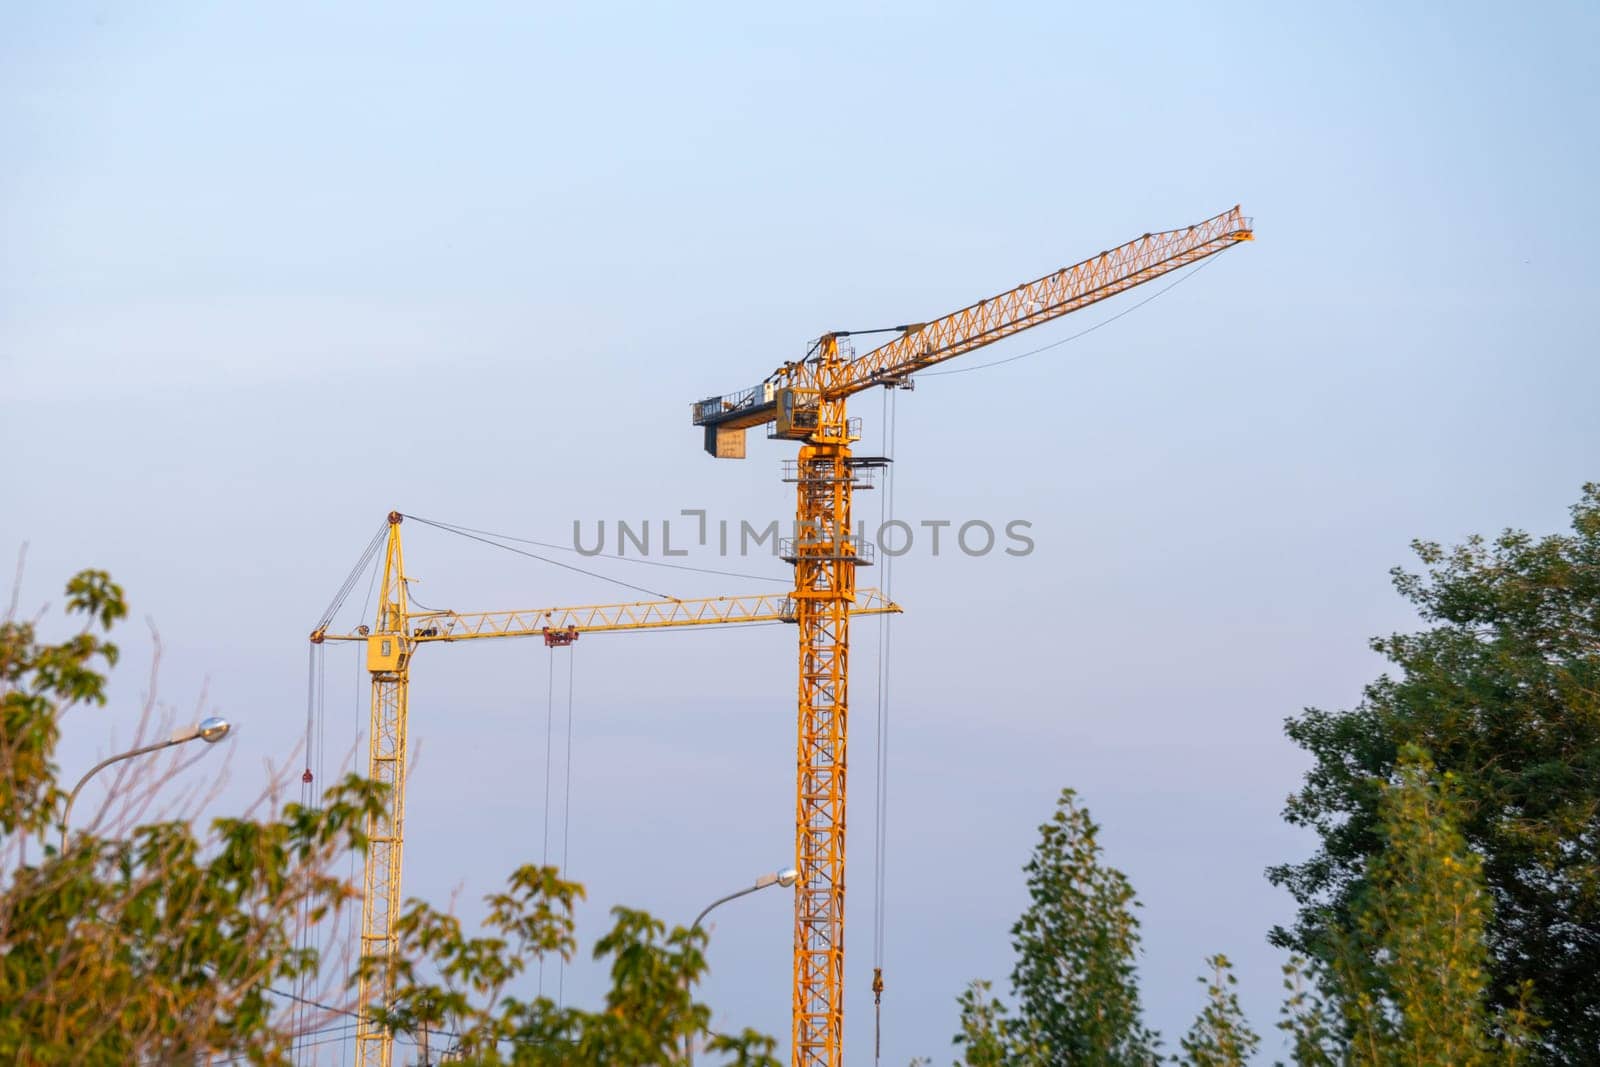 Construction crane takes a pause, captivatingly silhouetted in the midst of a lush forest.